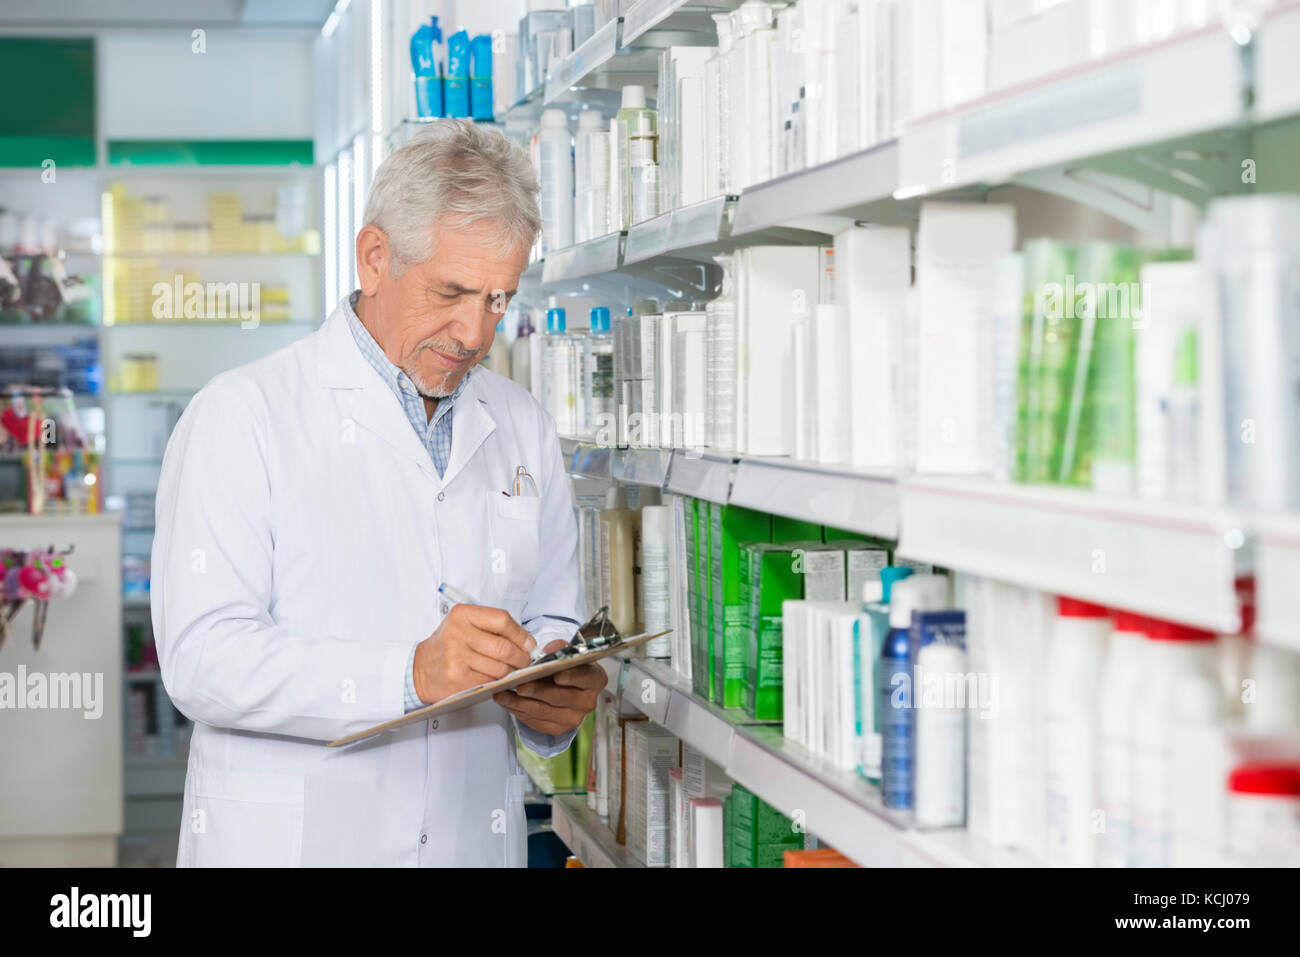 Chemist Writing On Clipboard While Standing By Shelves Stock Photo